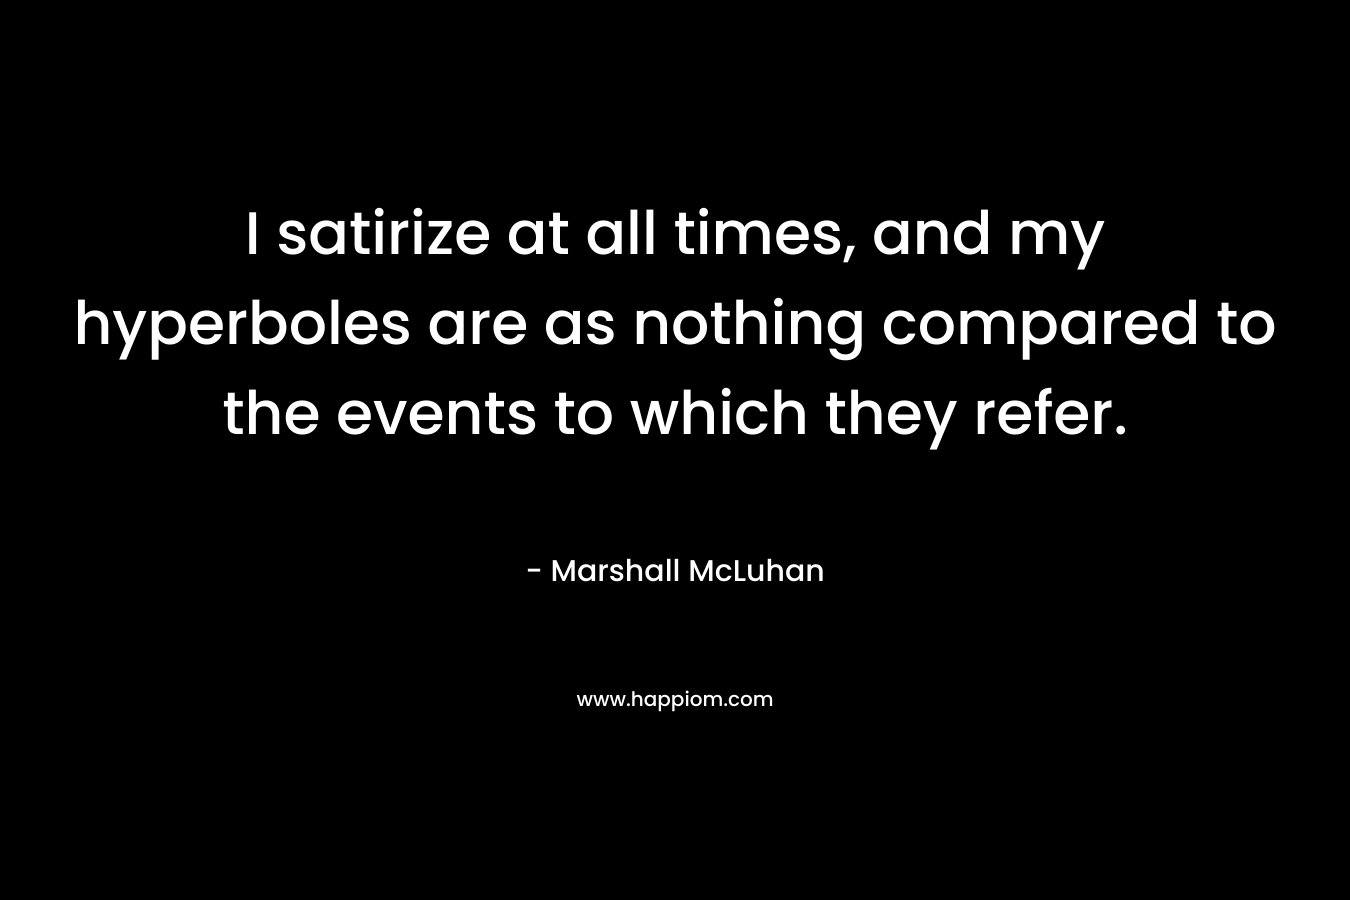 I satirize at all times, and my hyperboles are as nothing compared to the events to which they refer. – Marshall McLuhan